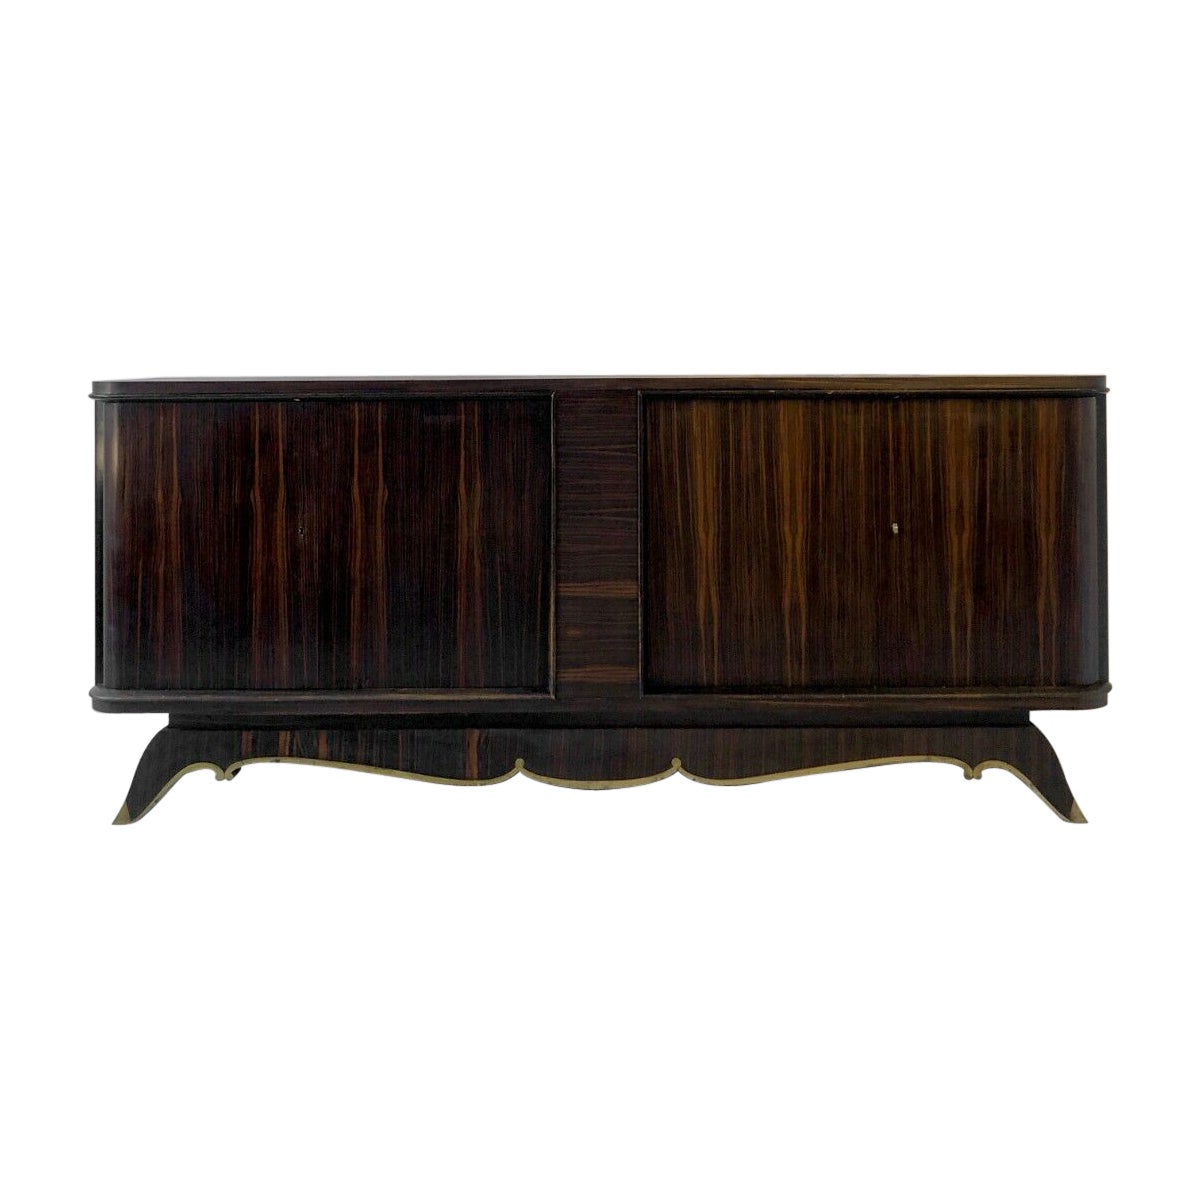 A Wide Spectacular ART DECO NEO-CLASSICAL SIDEBOARD by JULES LELEU, France 1930 For Sale